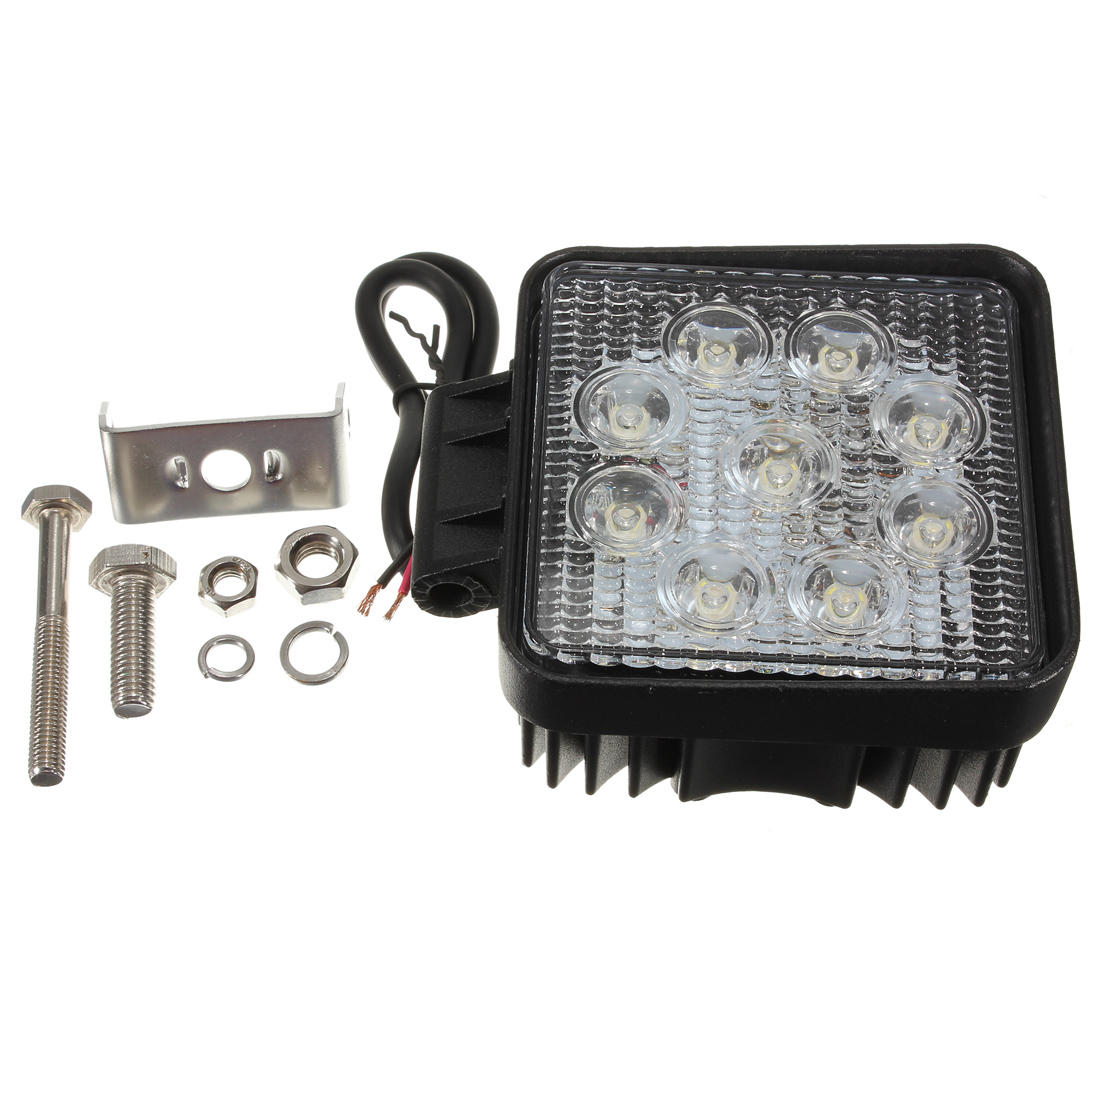 27W-9-LED-White-Work-Spot-Pencil-Off-Road-Lamp-Light-Truck-4WD-4x4-51562